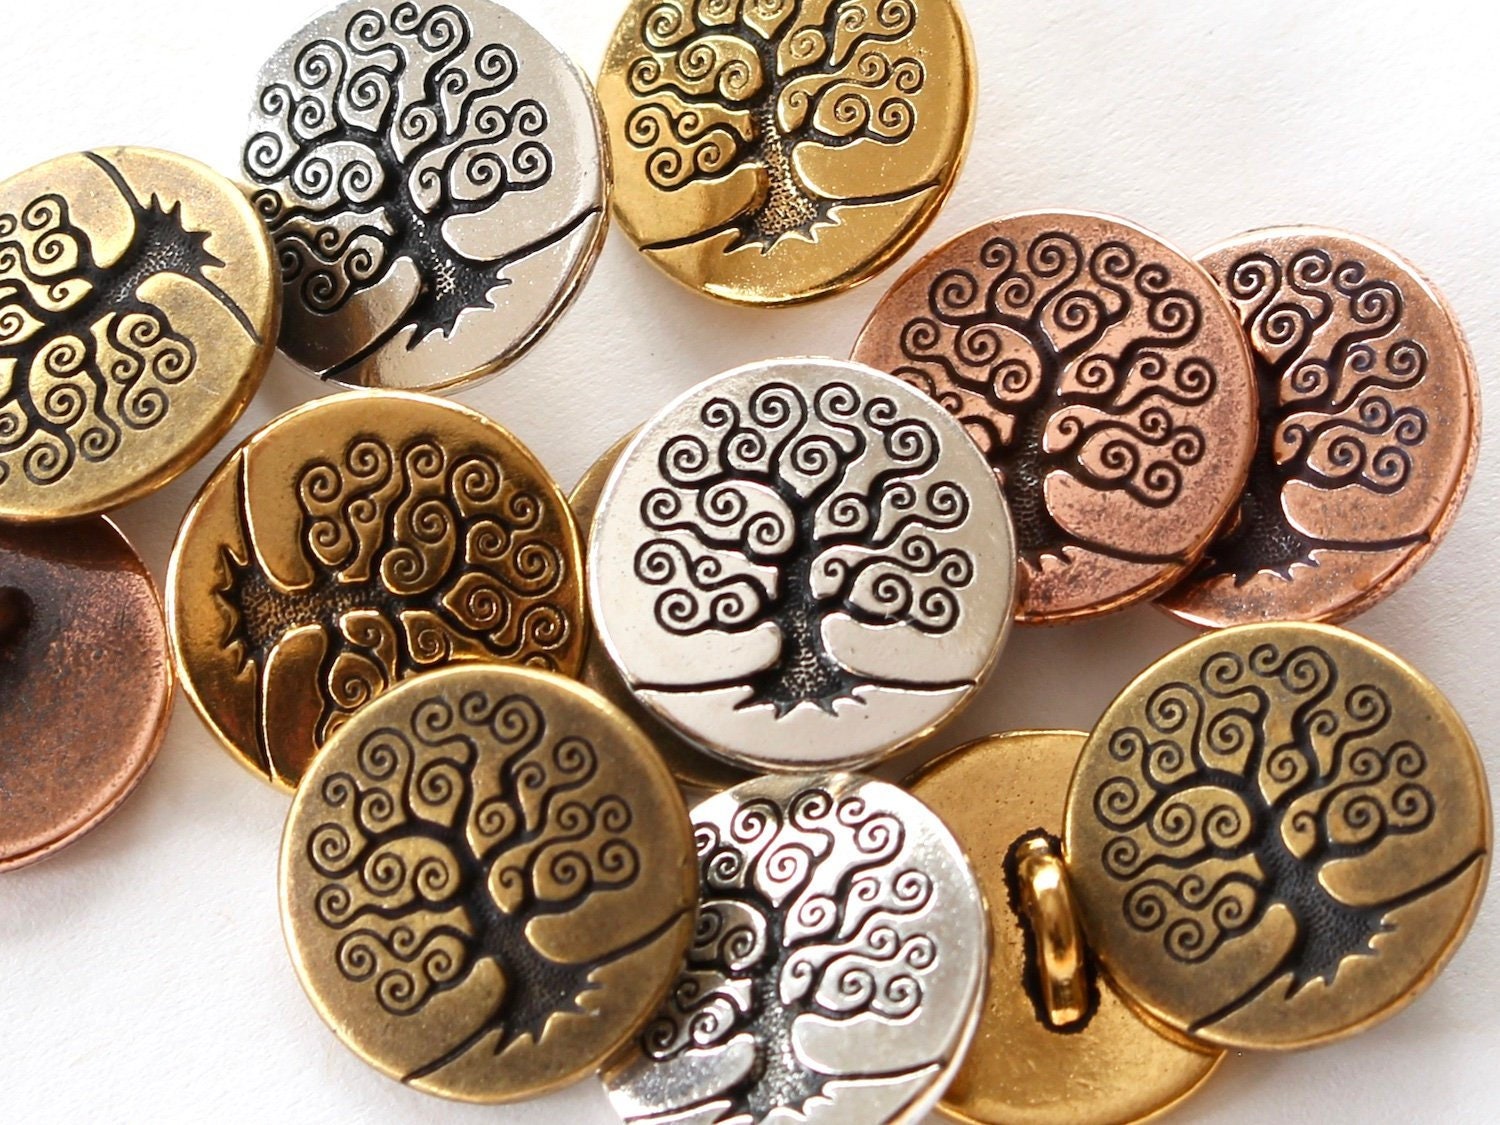 Wholesale Heart Buttons for Jewelry Making - TierraCast